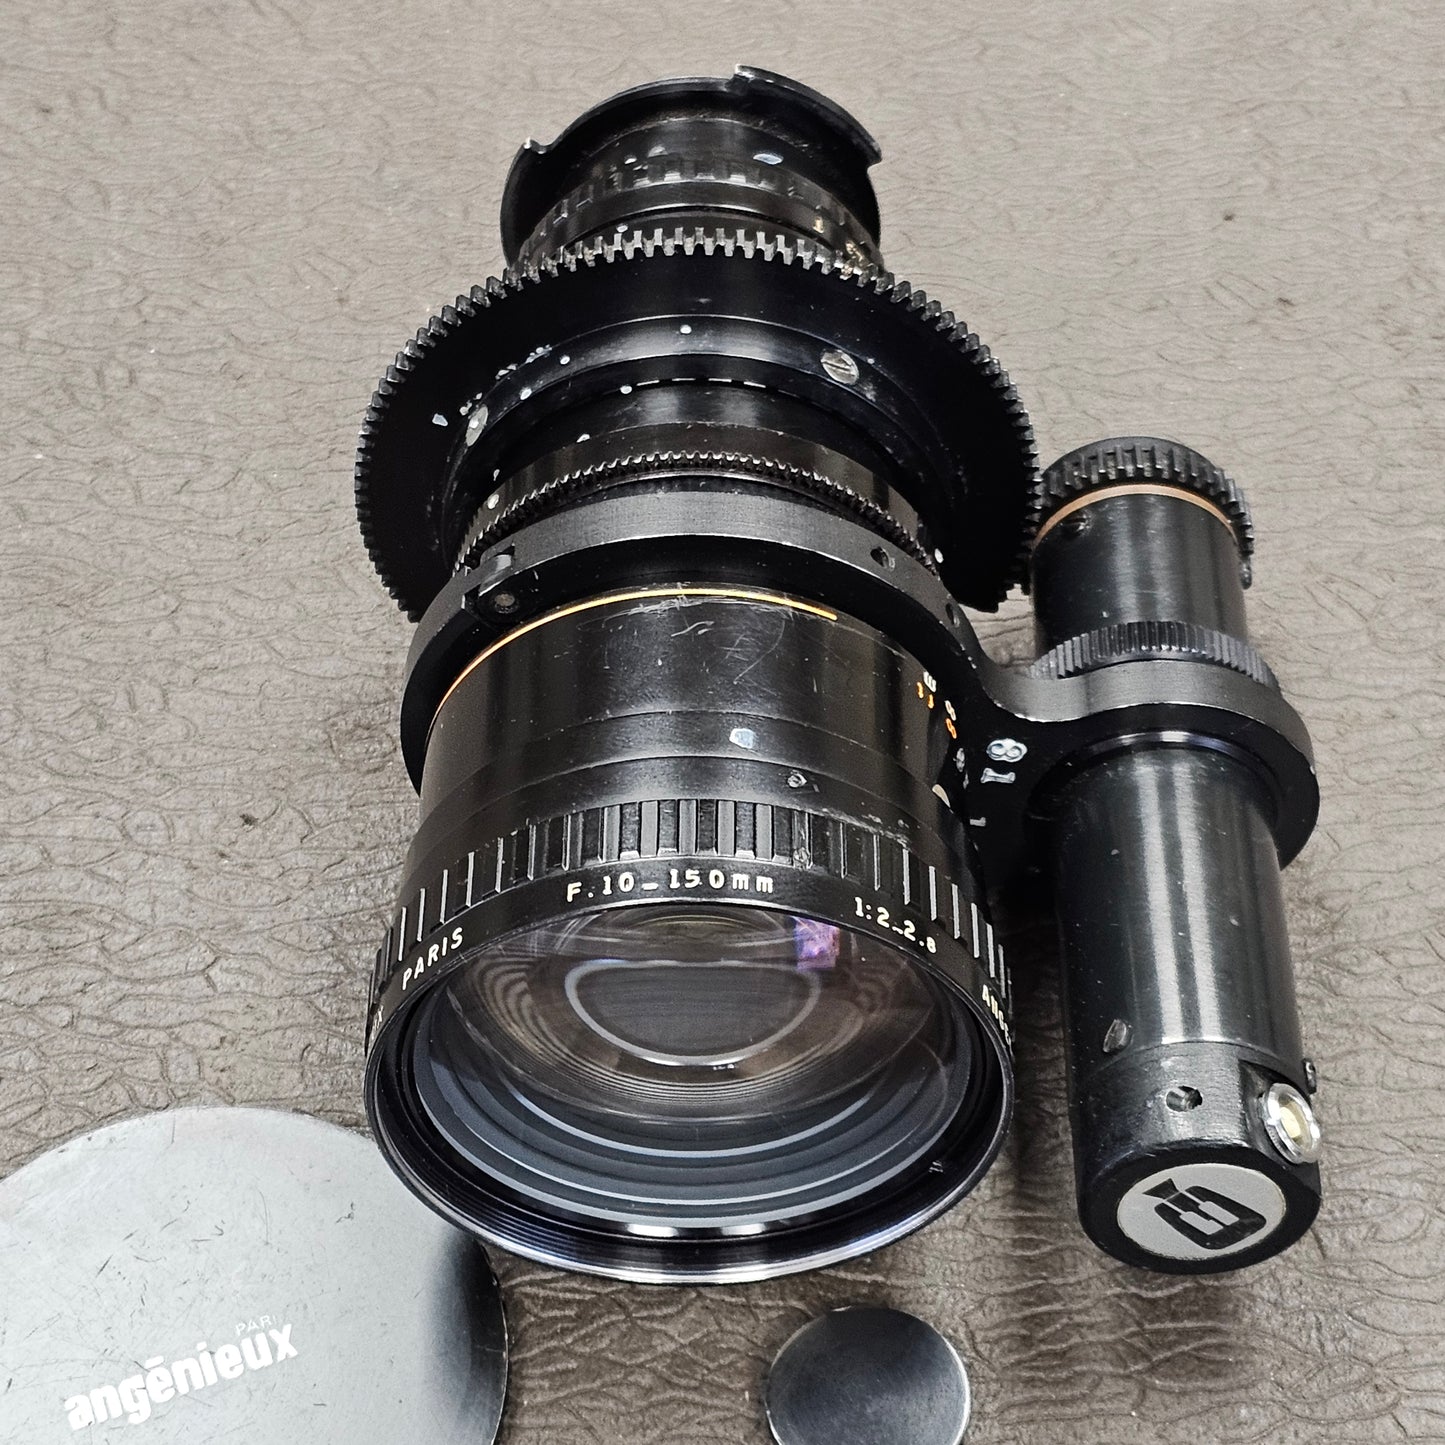 Angenieux 10-150mm T2.3 Type 15 x 10B Zoom Lens in CP-16 Mount S# 1414135